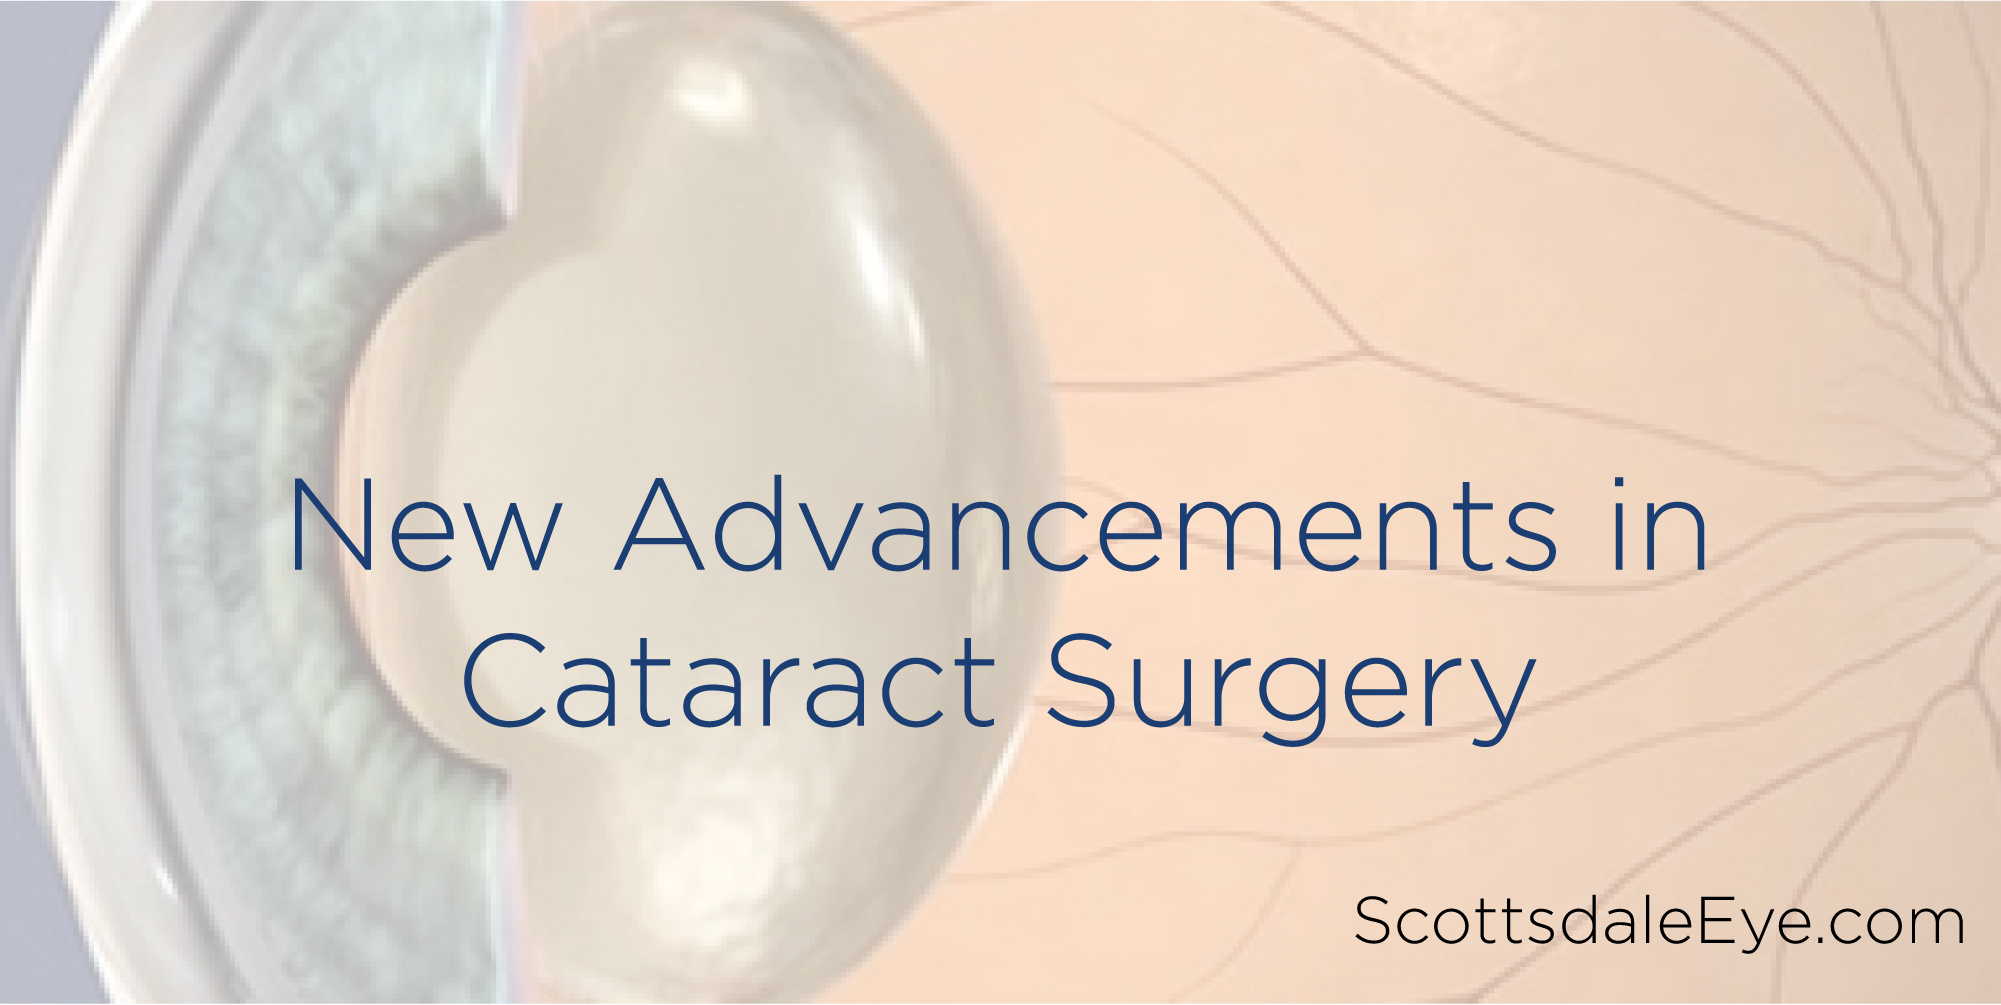 New Advancements in Cataract Surgery